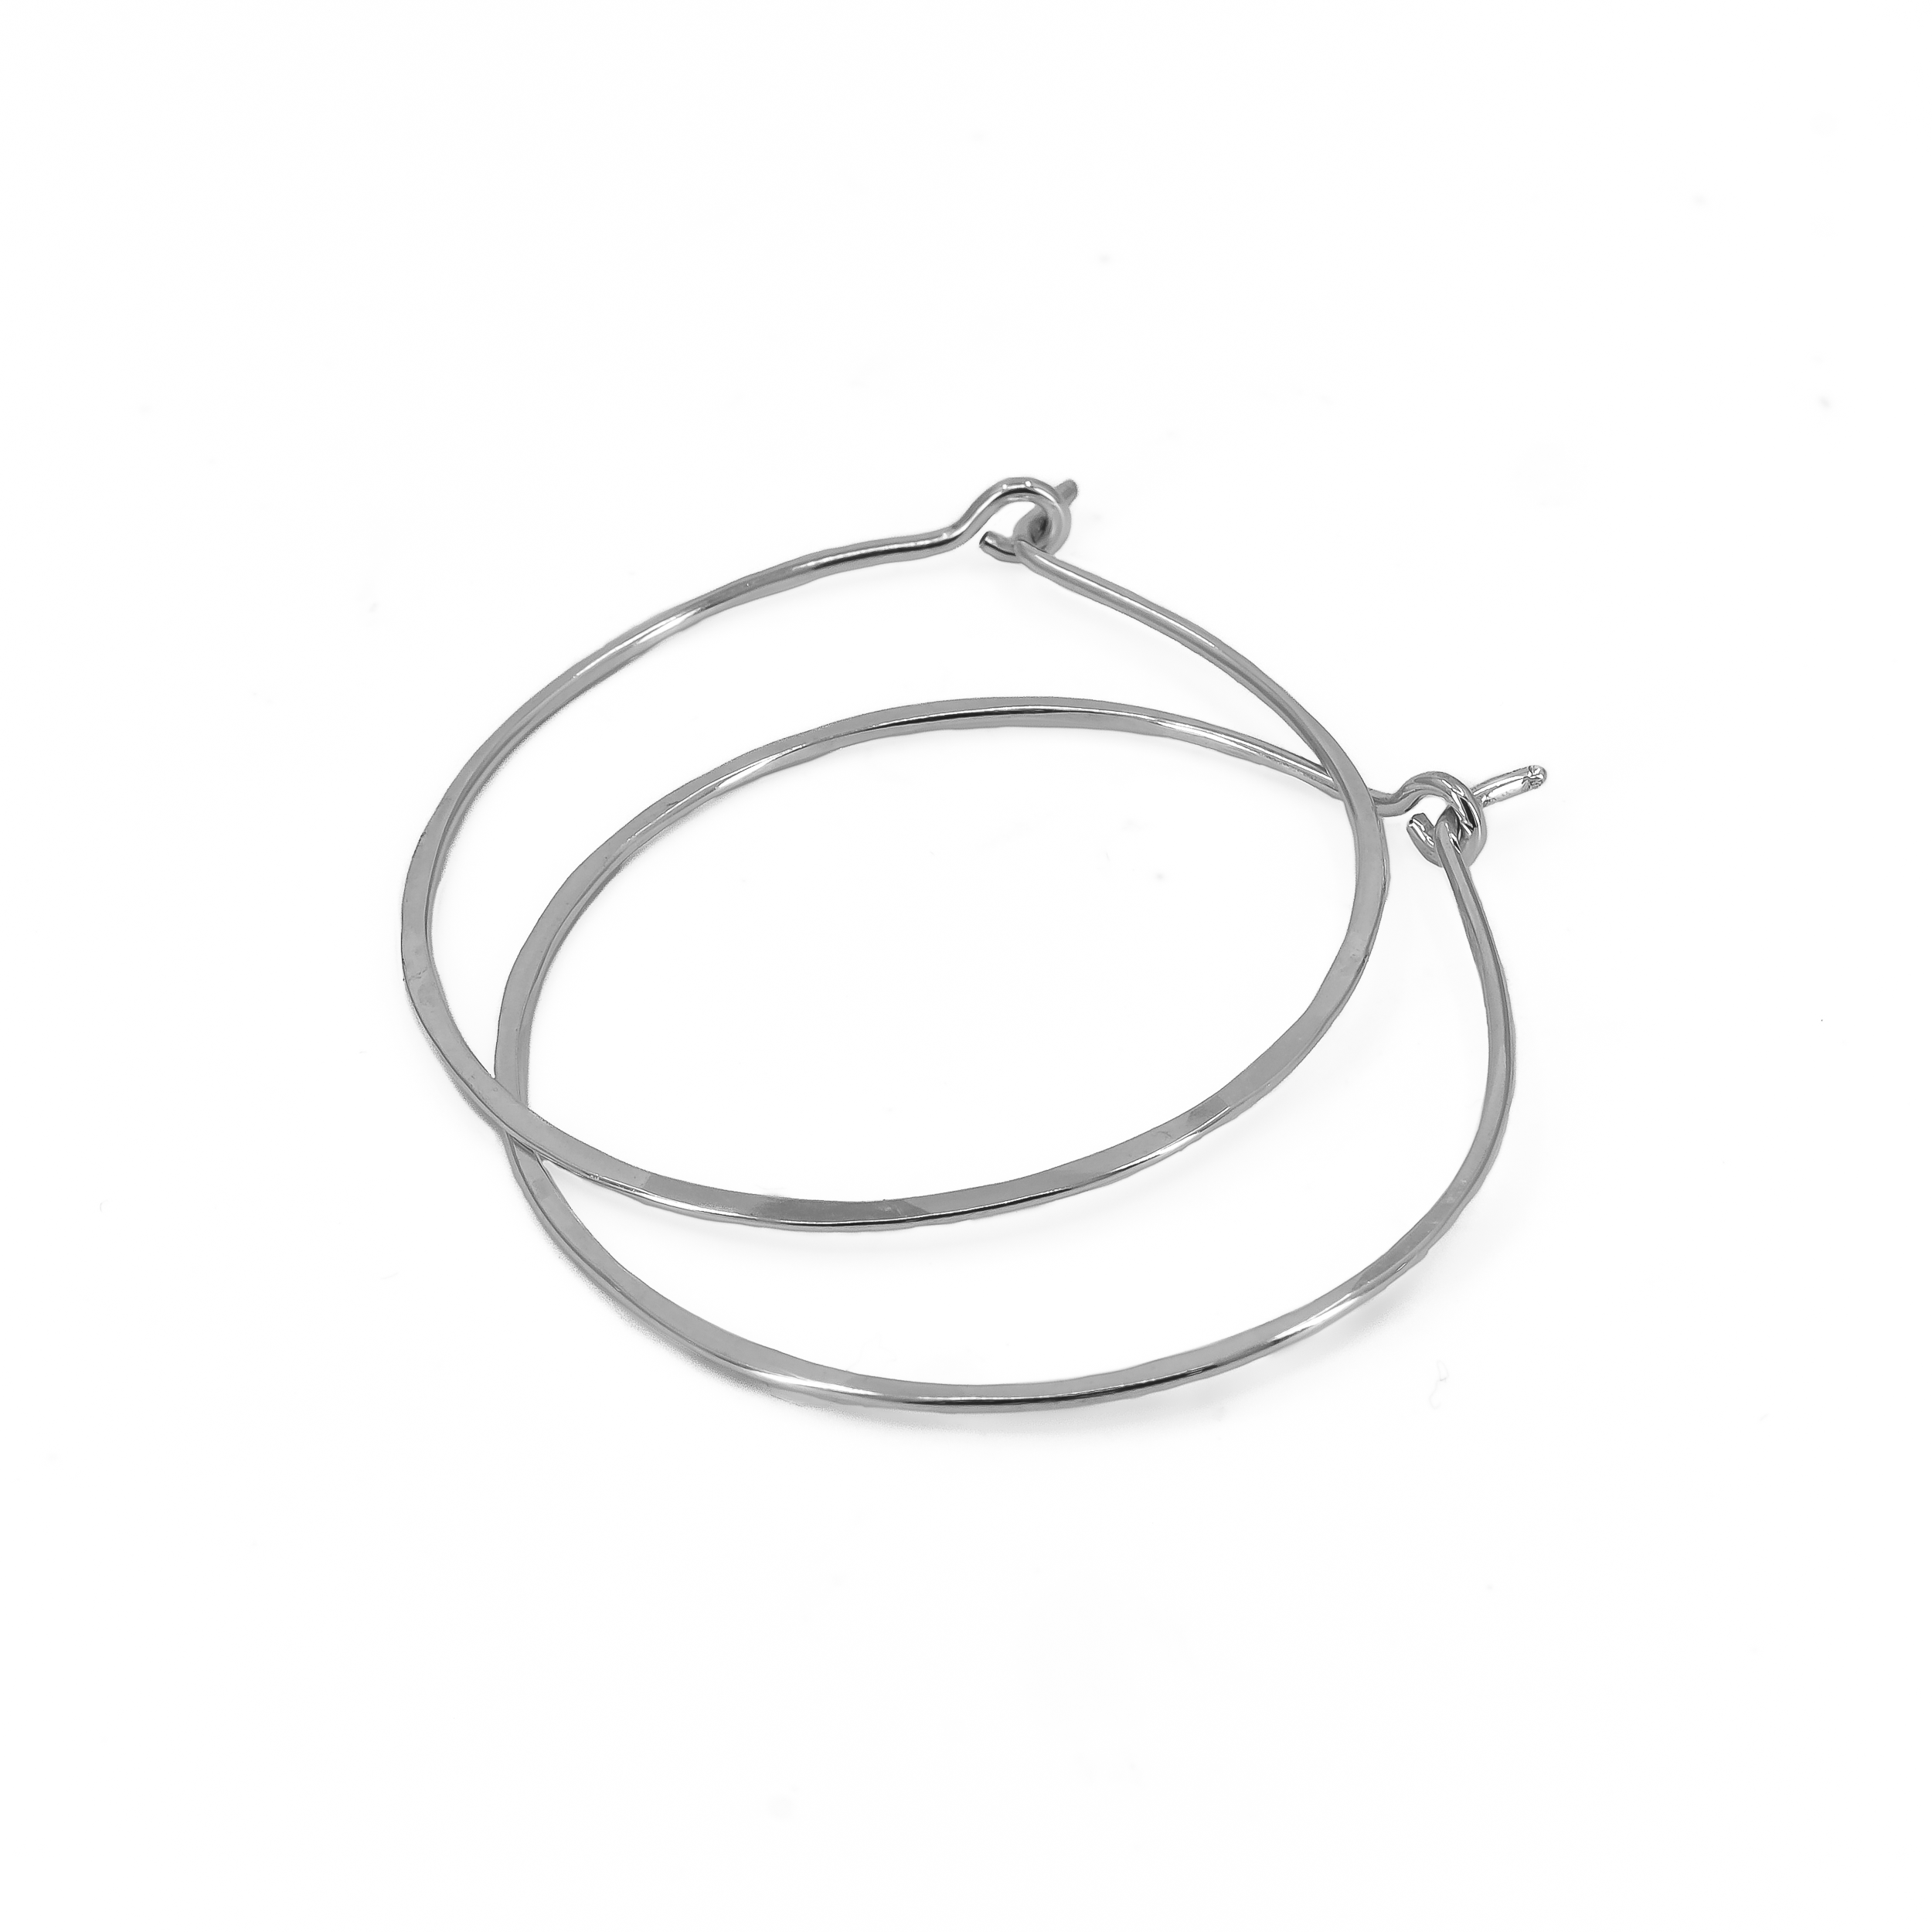 Extra small 1 inch sterling silver hoop earrings